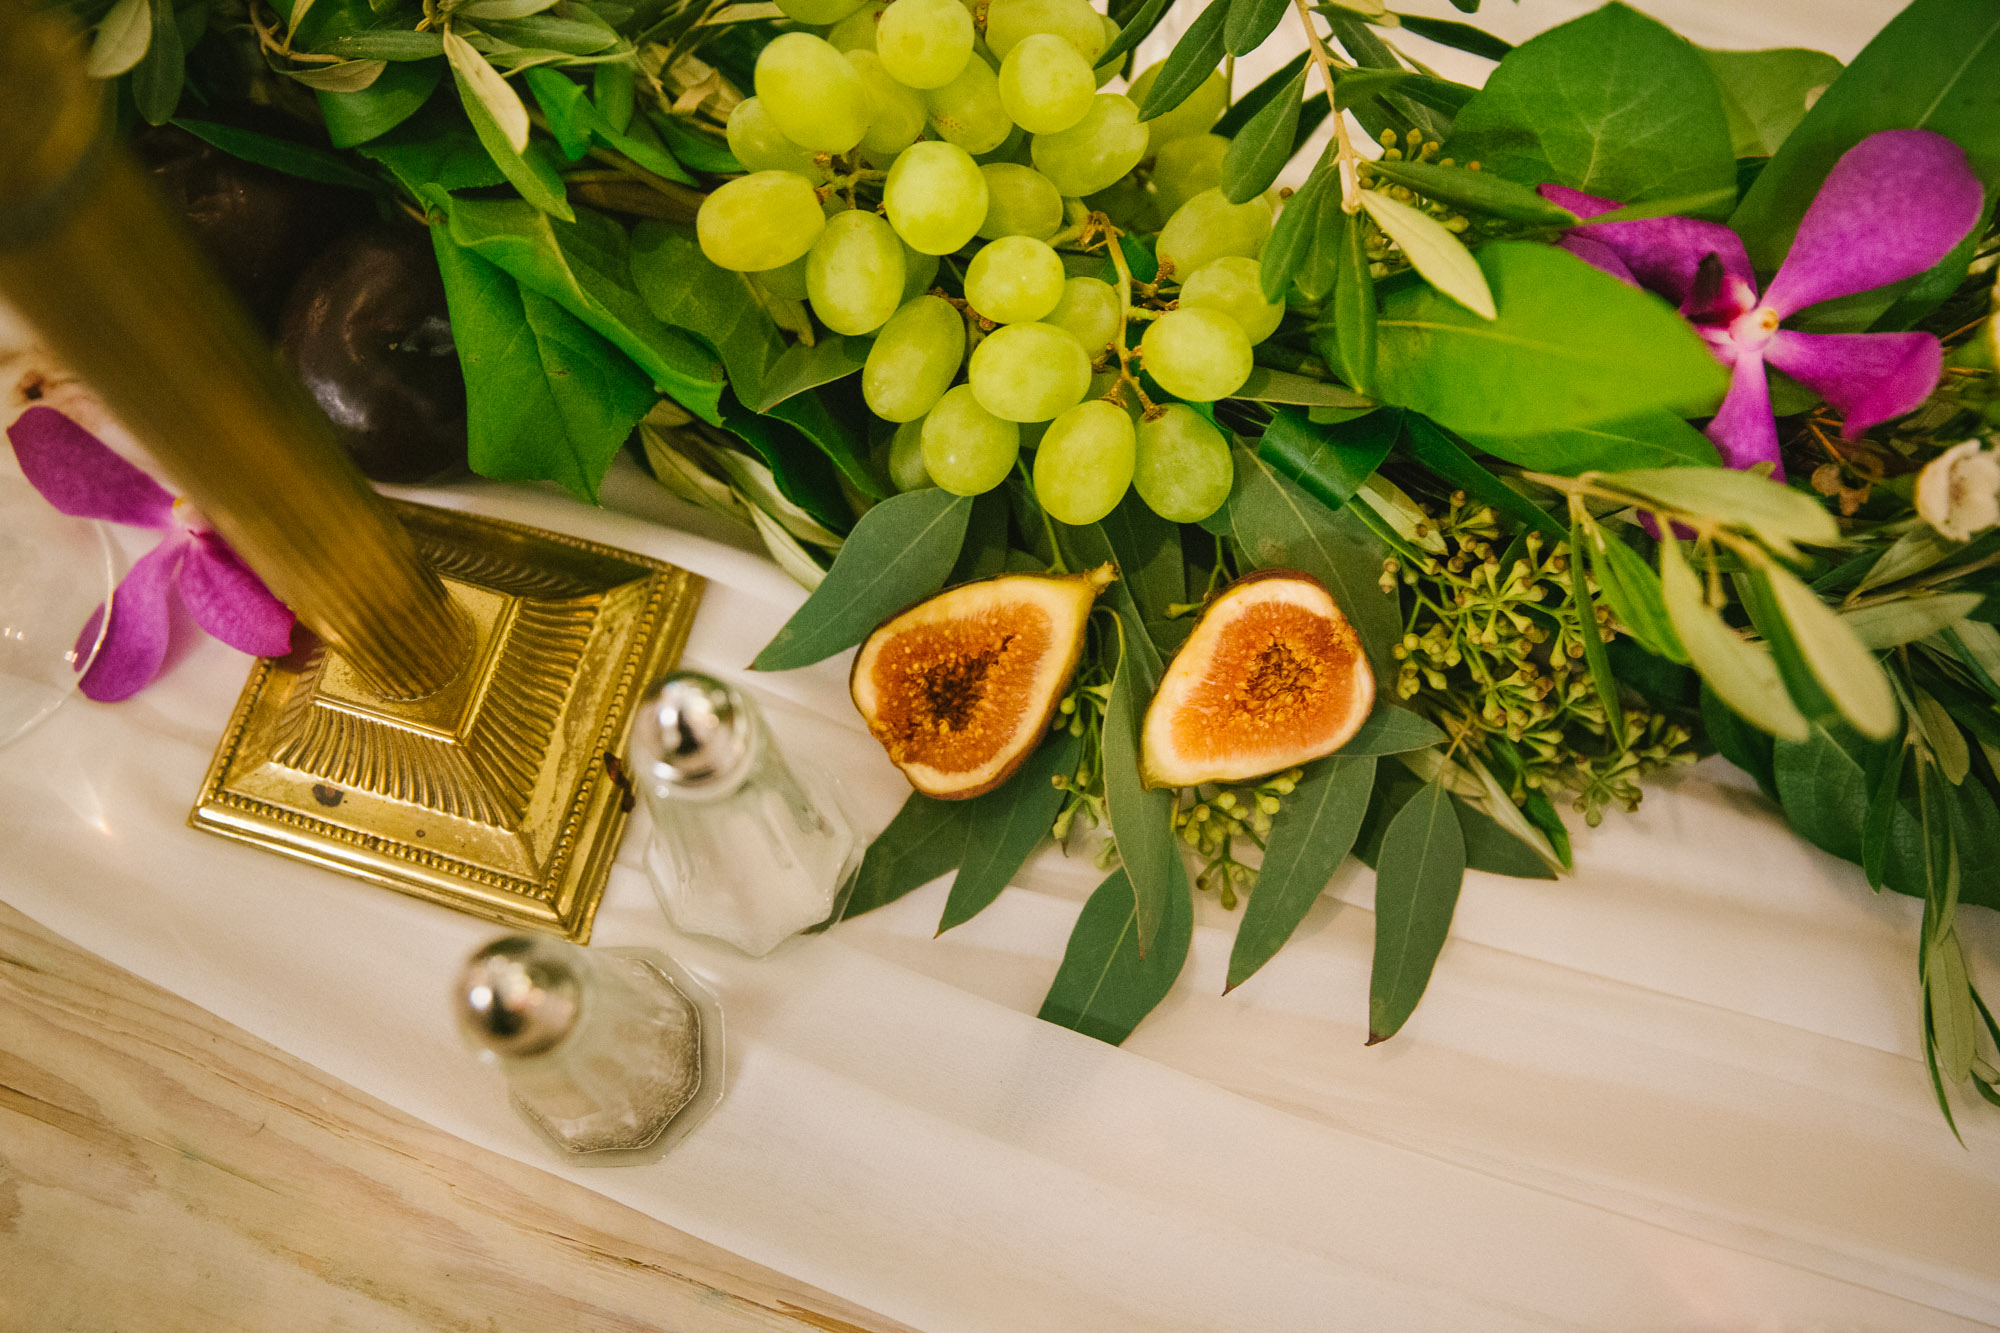 You might want to hire a professional wedding photographer reason 39: Artful photo of gratuitous fresh figs resting among laurels.